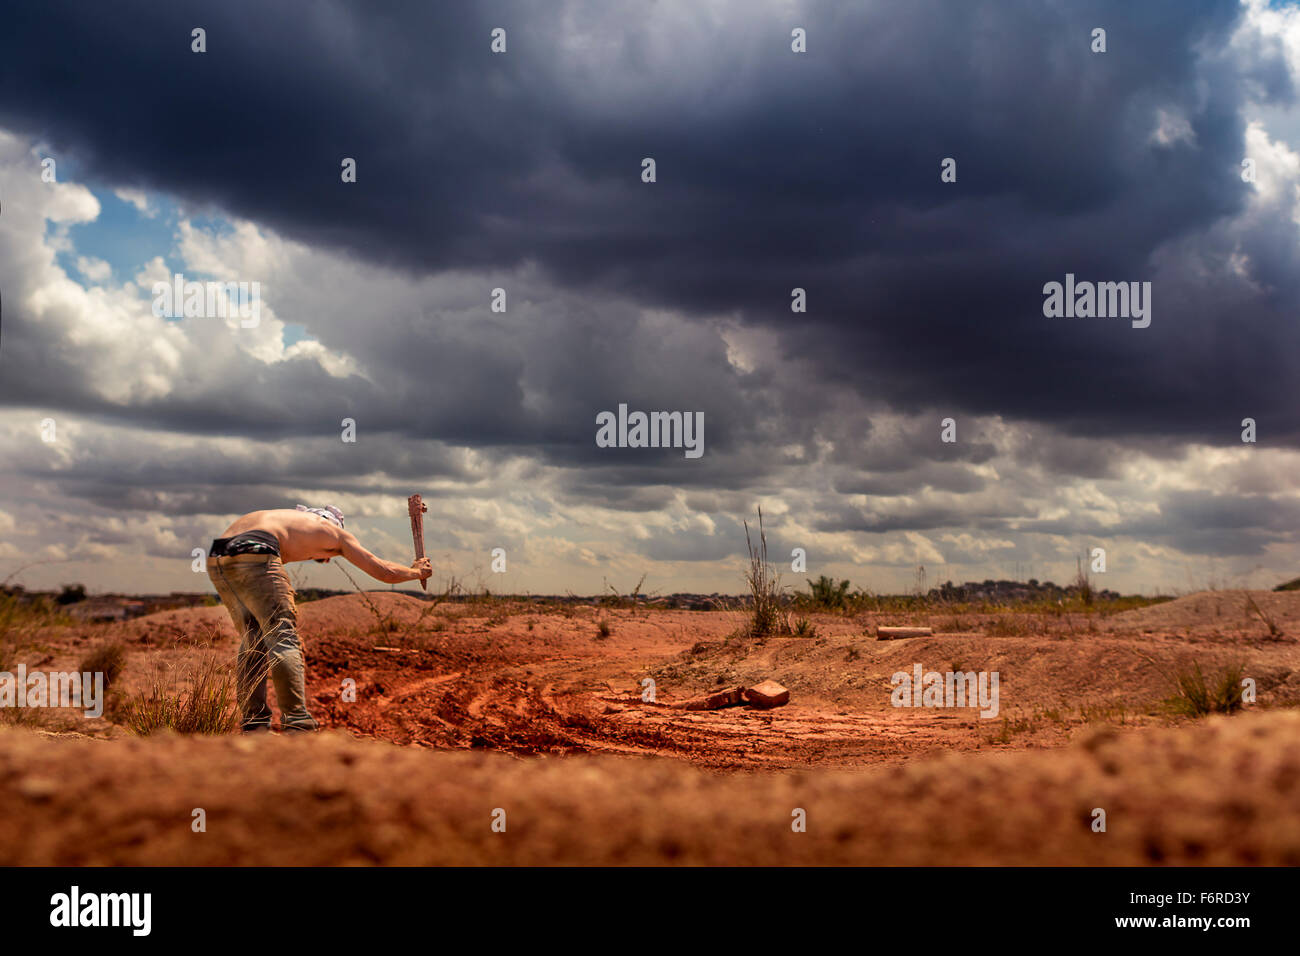 worker on dry area. Stock Photo